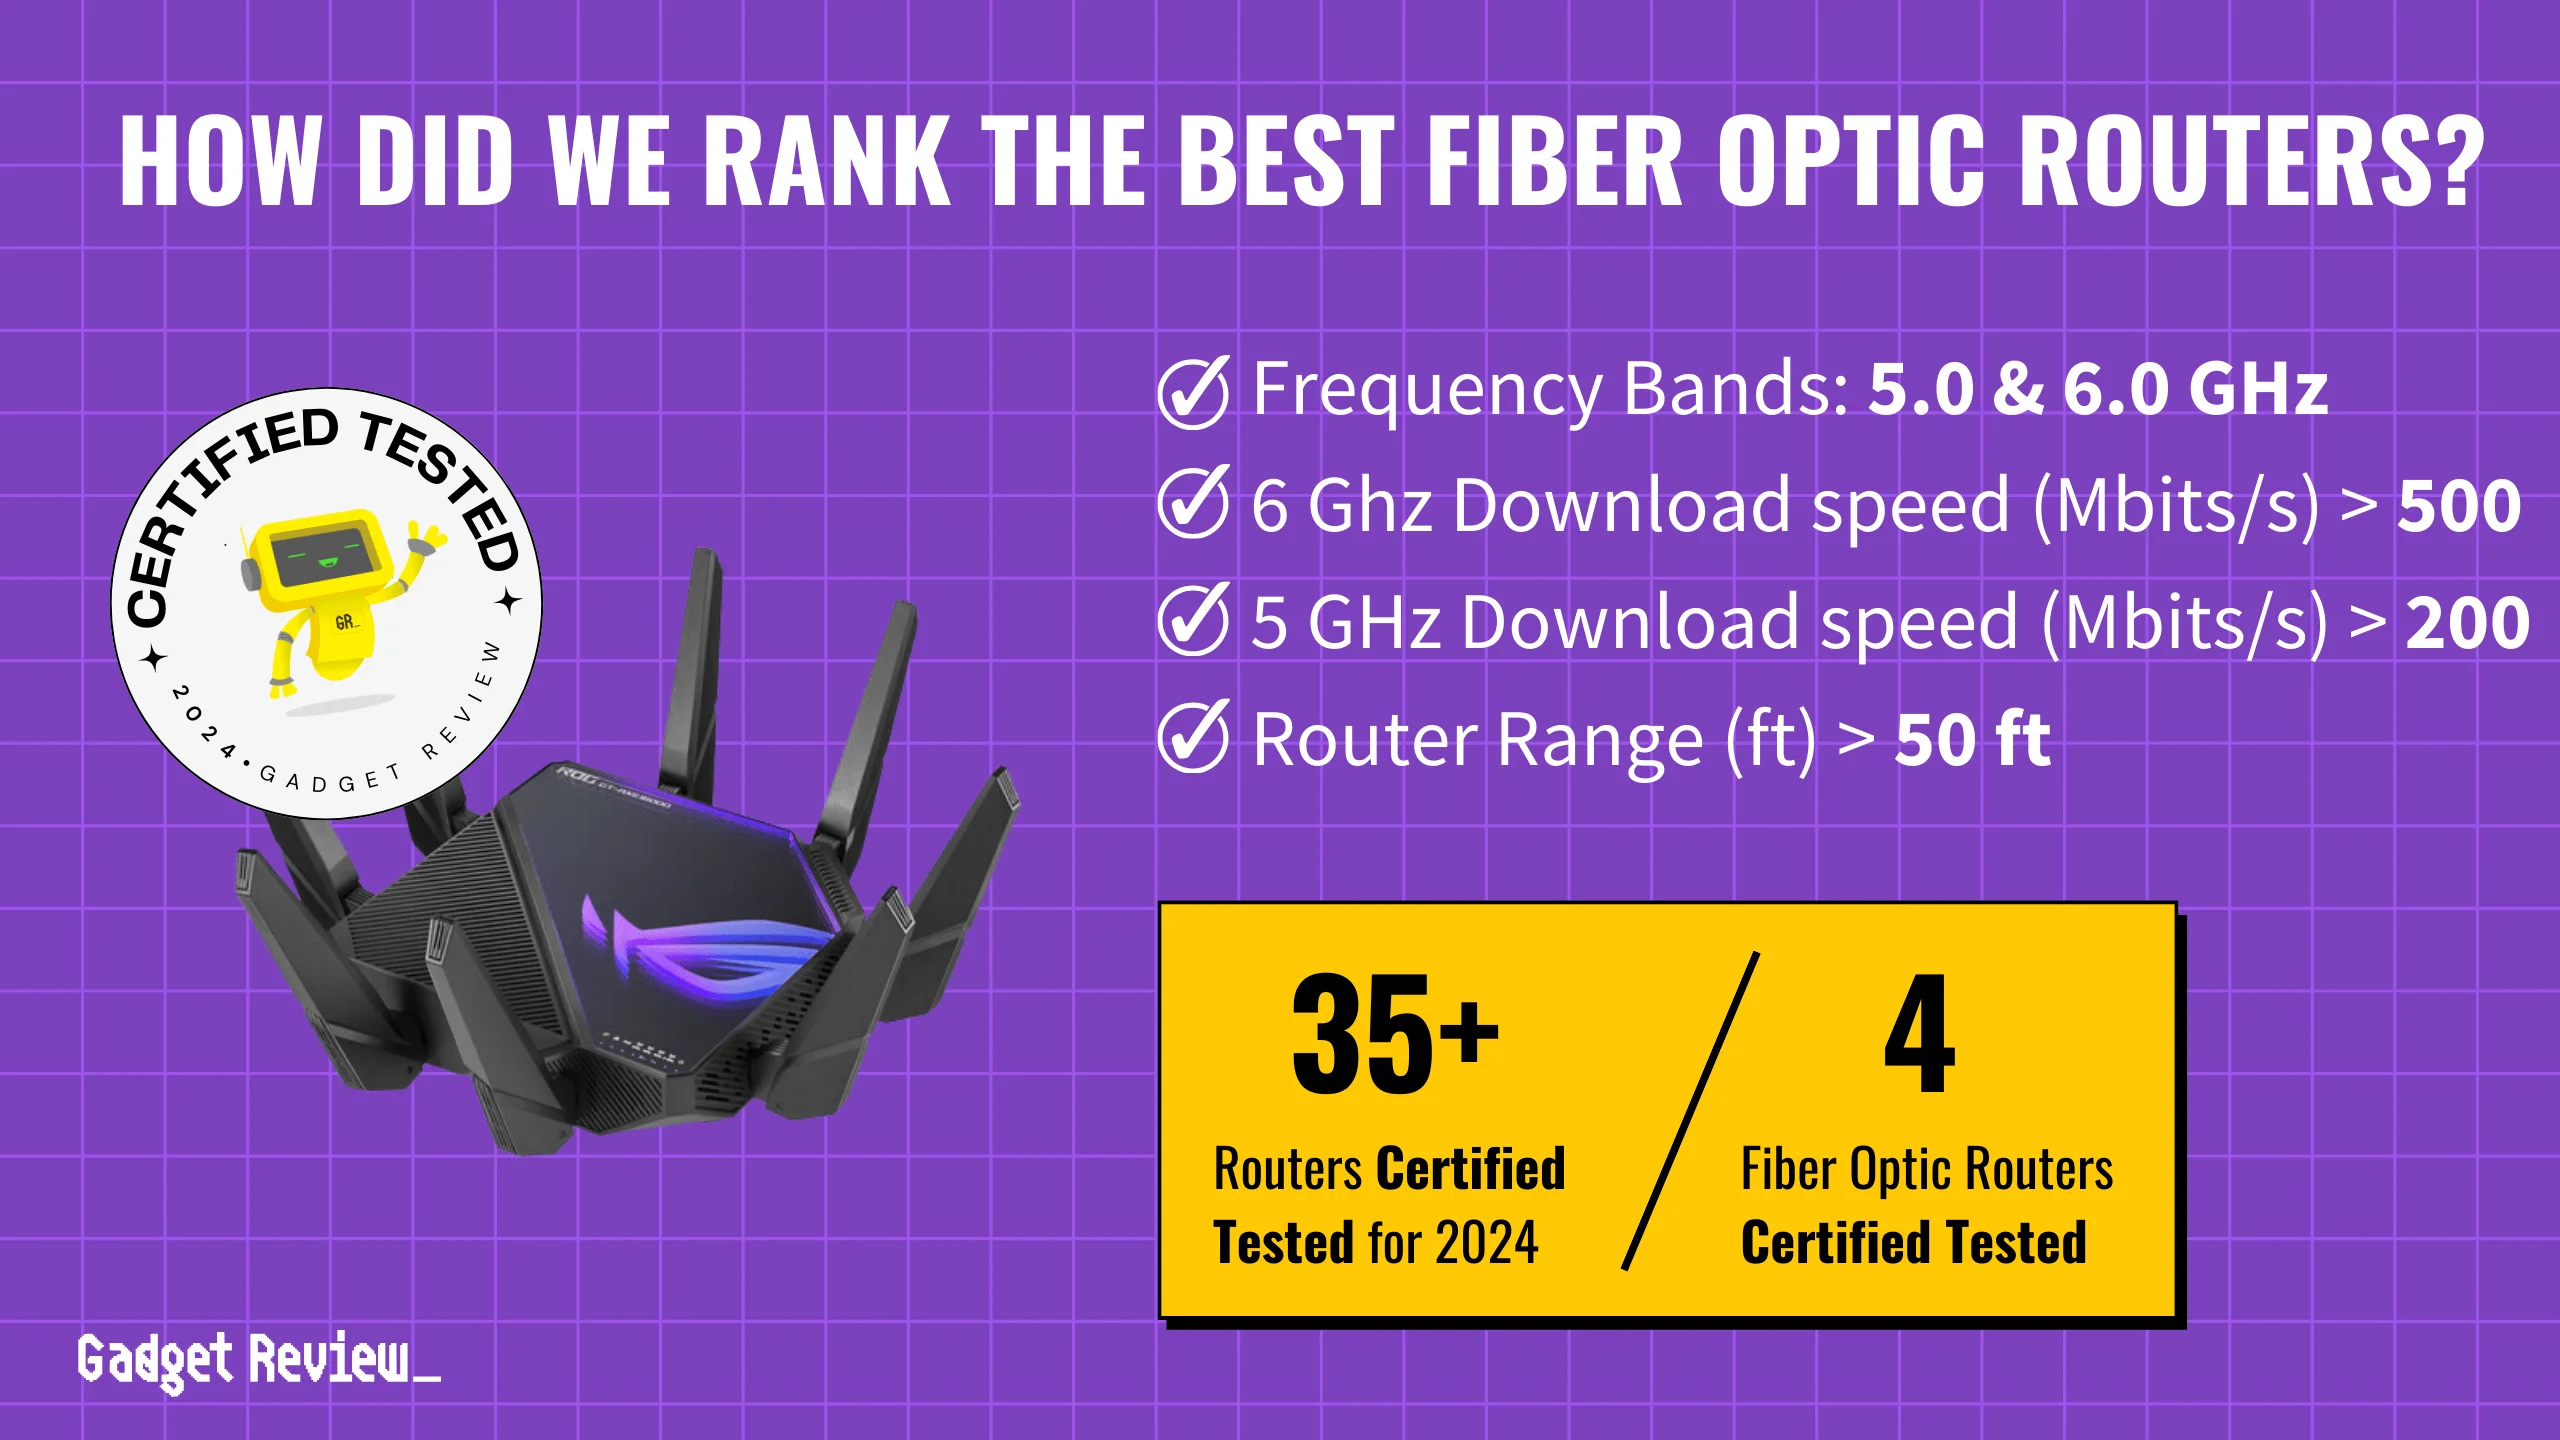 We Ranked the 4 Best Fiber Optic Routers